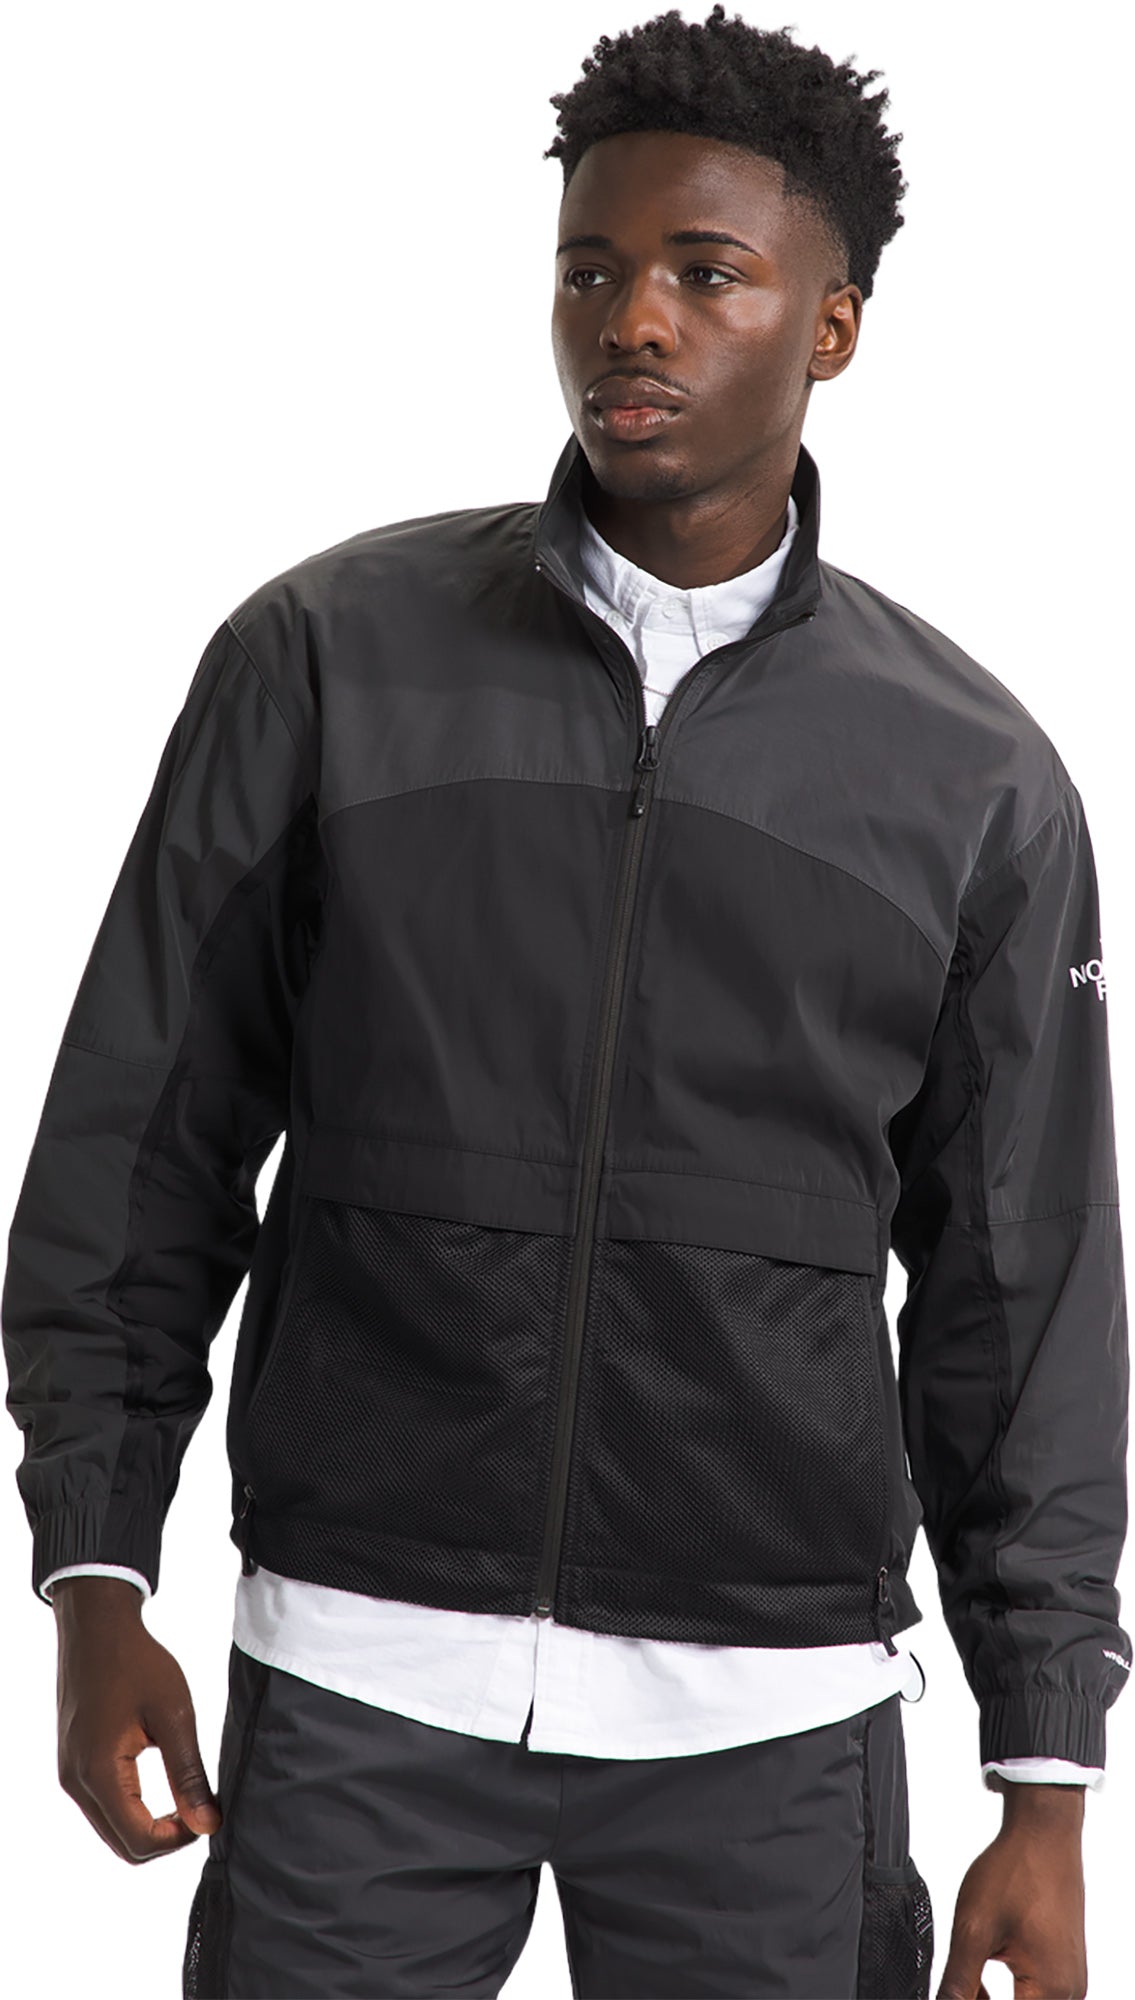 The North Face 2000 Mountain Light Wind Jacket - Men’s